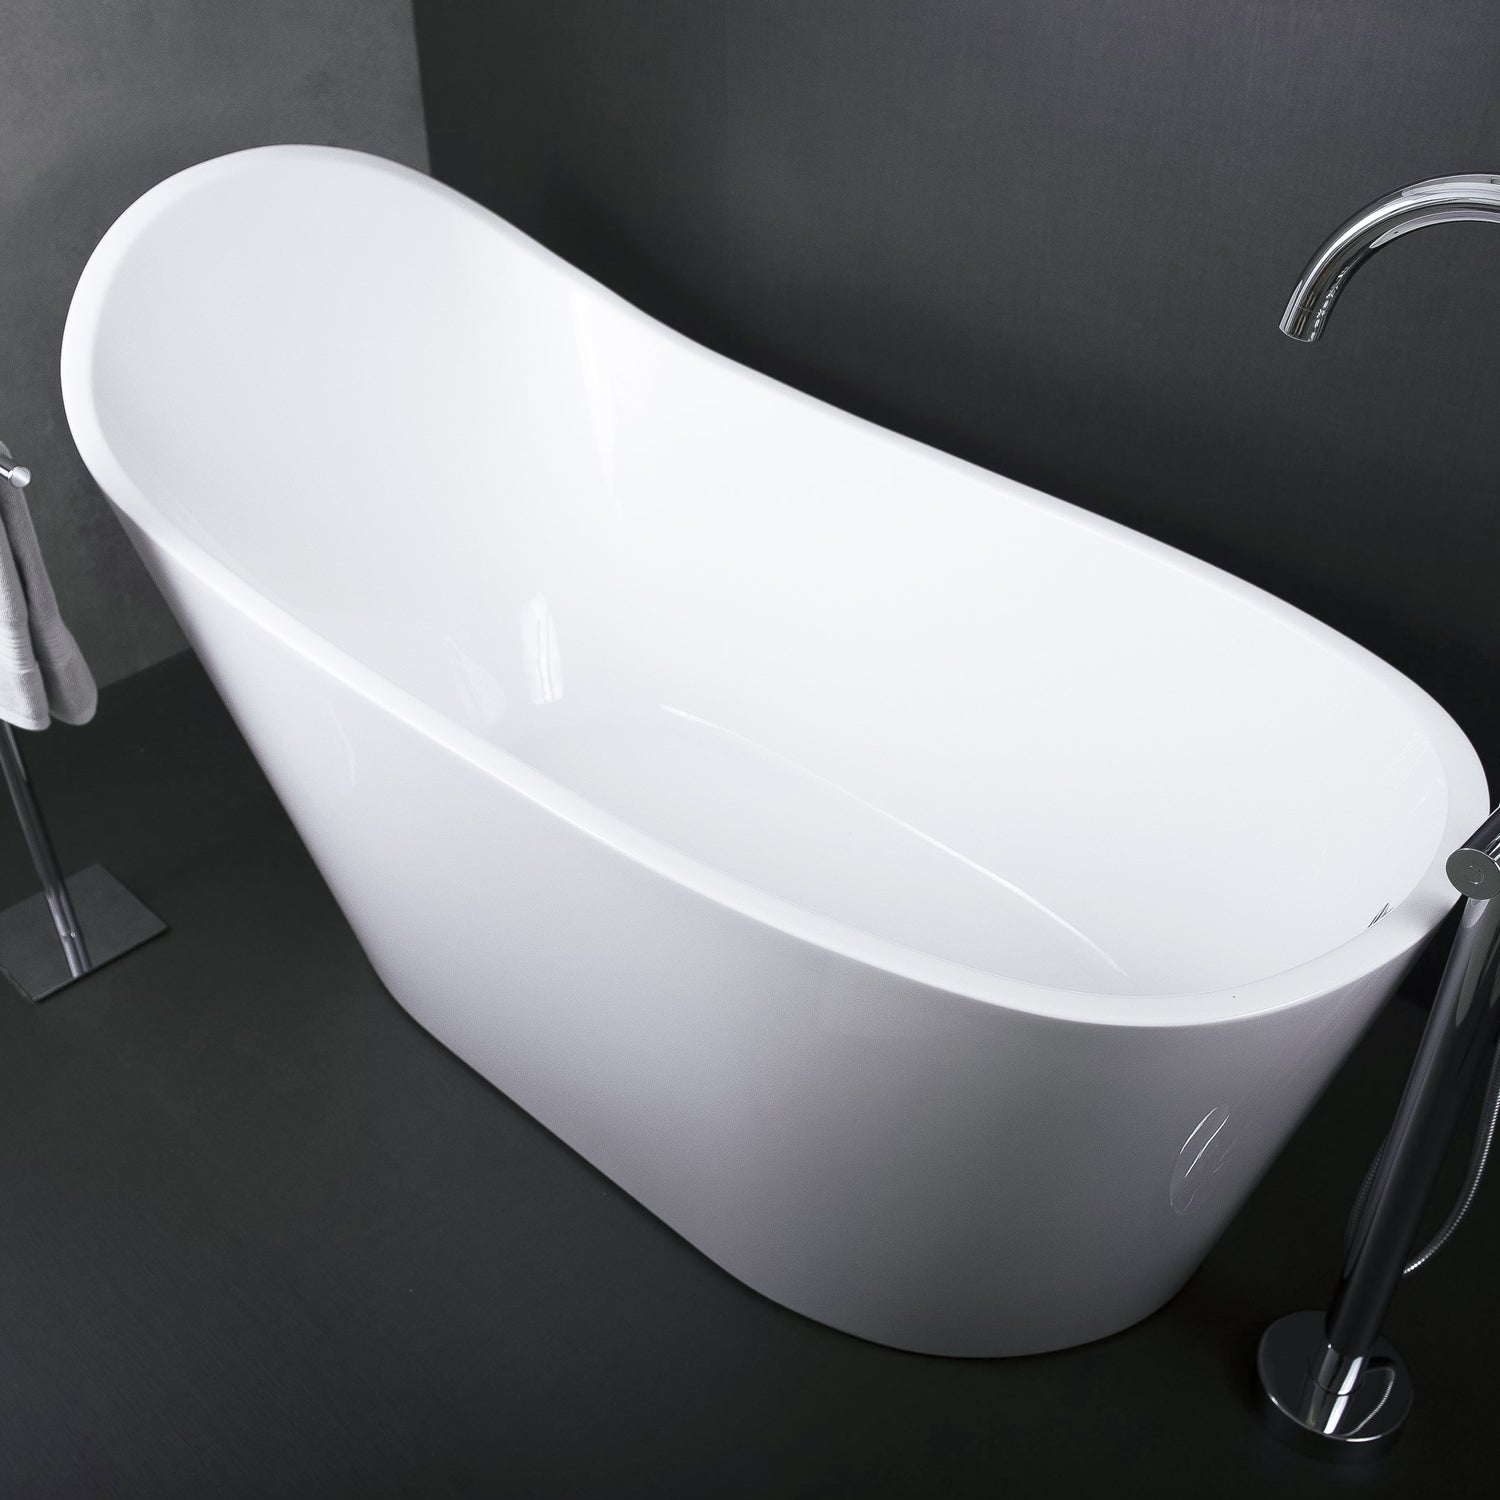 DAX Slipper Freestanding High Gloss Acrylic Bathtub with Central Drain and Overflow, Stainless Steel Frame, 66-15/16 x 35-1/16 x 31-1/2 Inches (BT-8089)